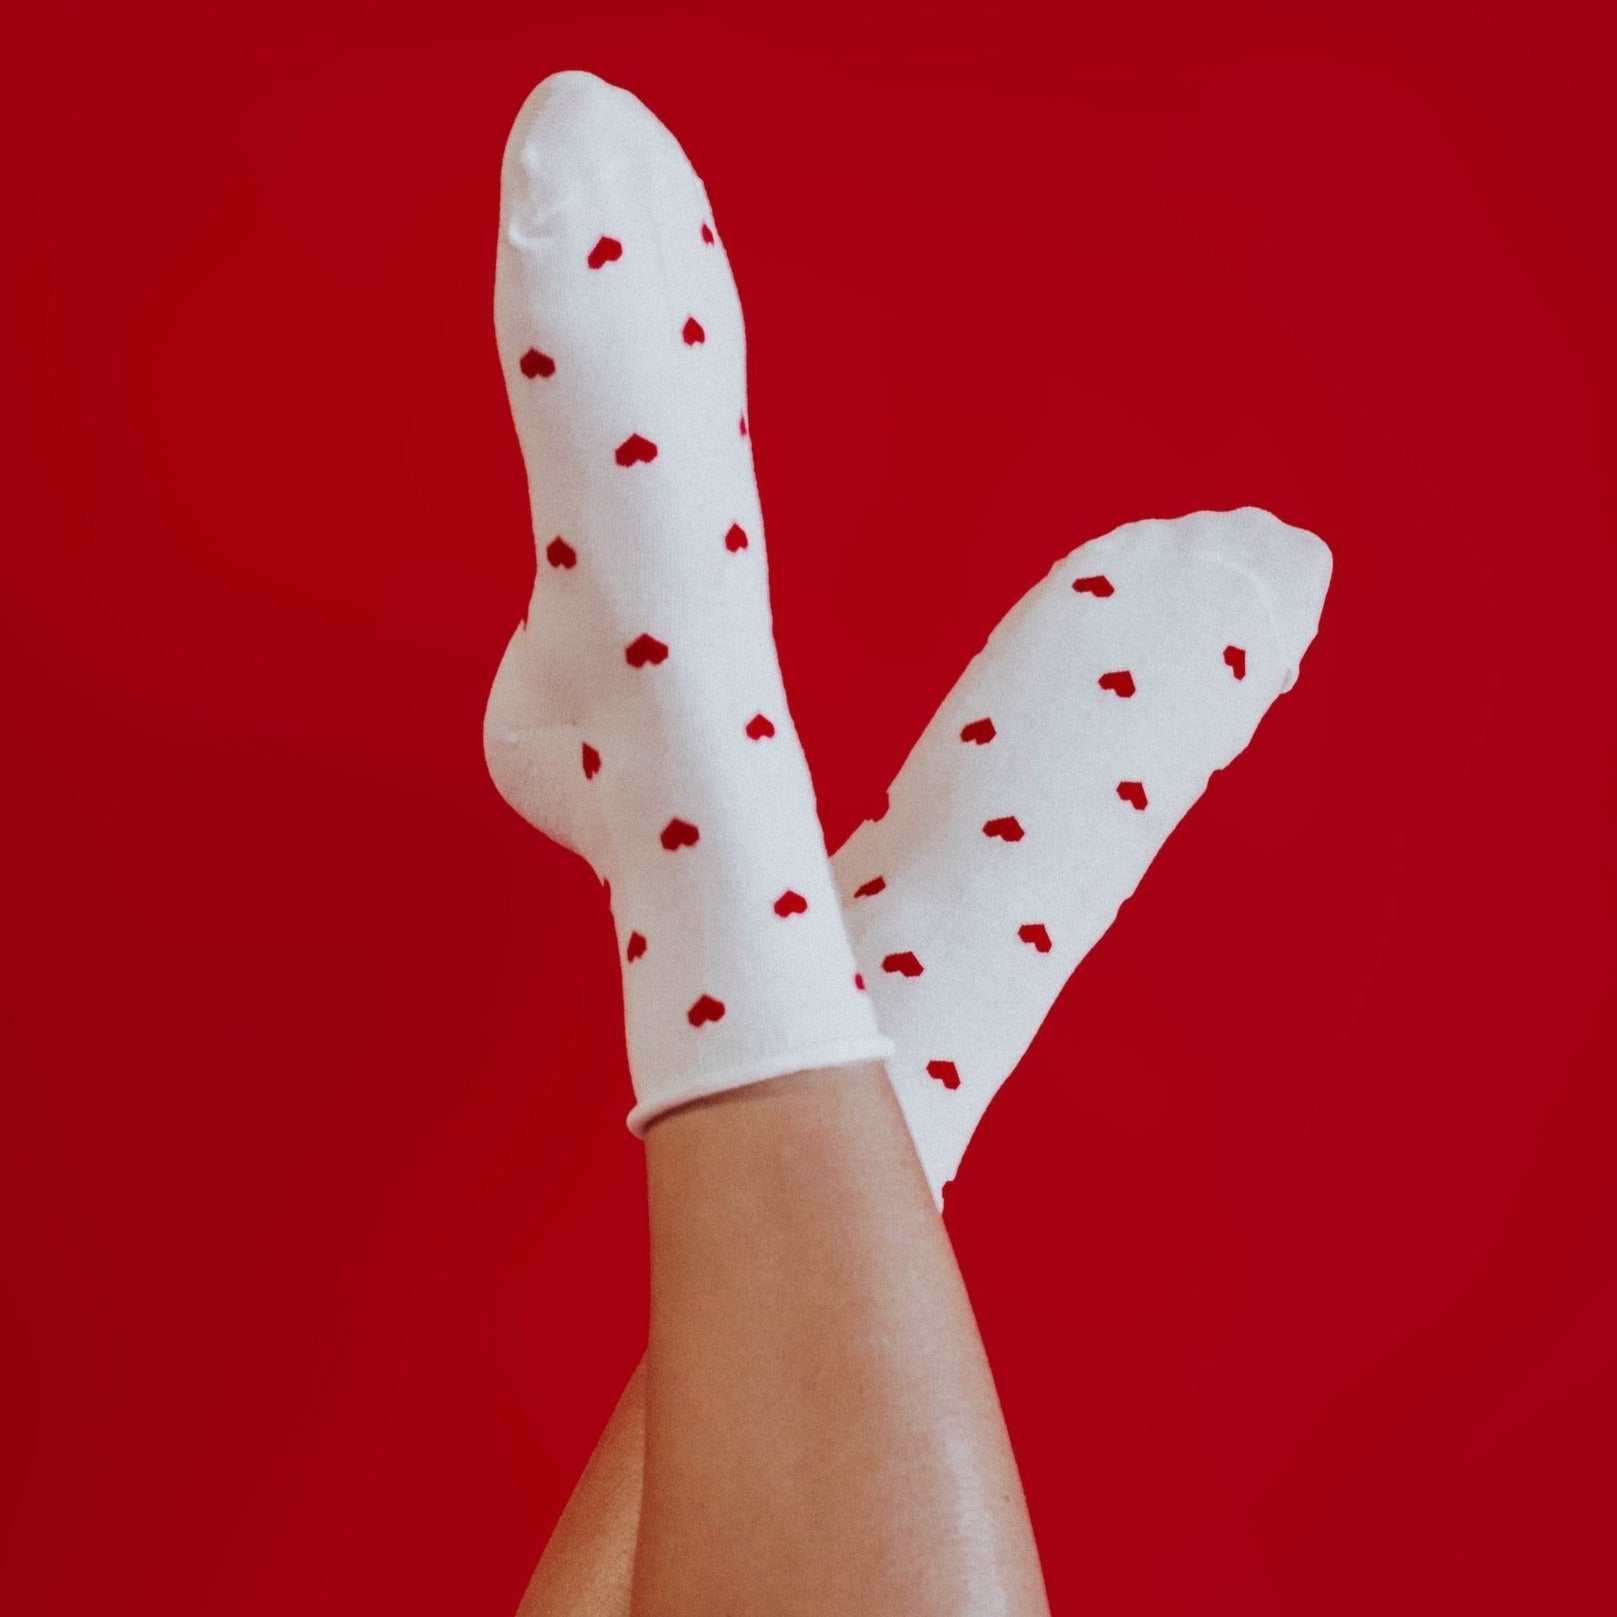 a woman's legs in the air wearing a pair of white crew socks that have tiny red hearts on them. her legs are against a red background.